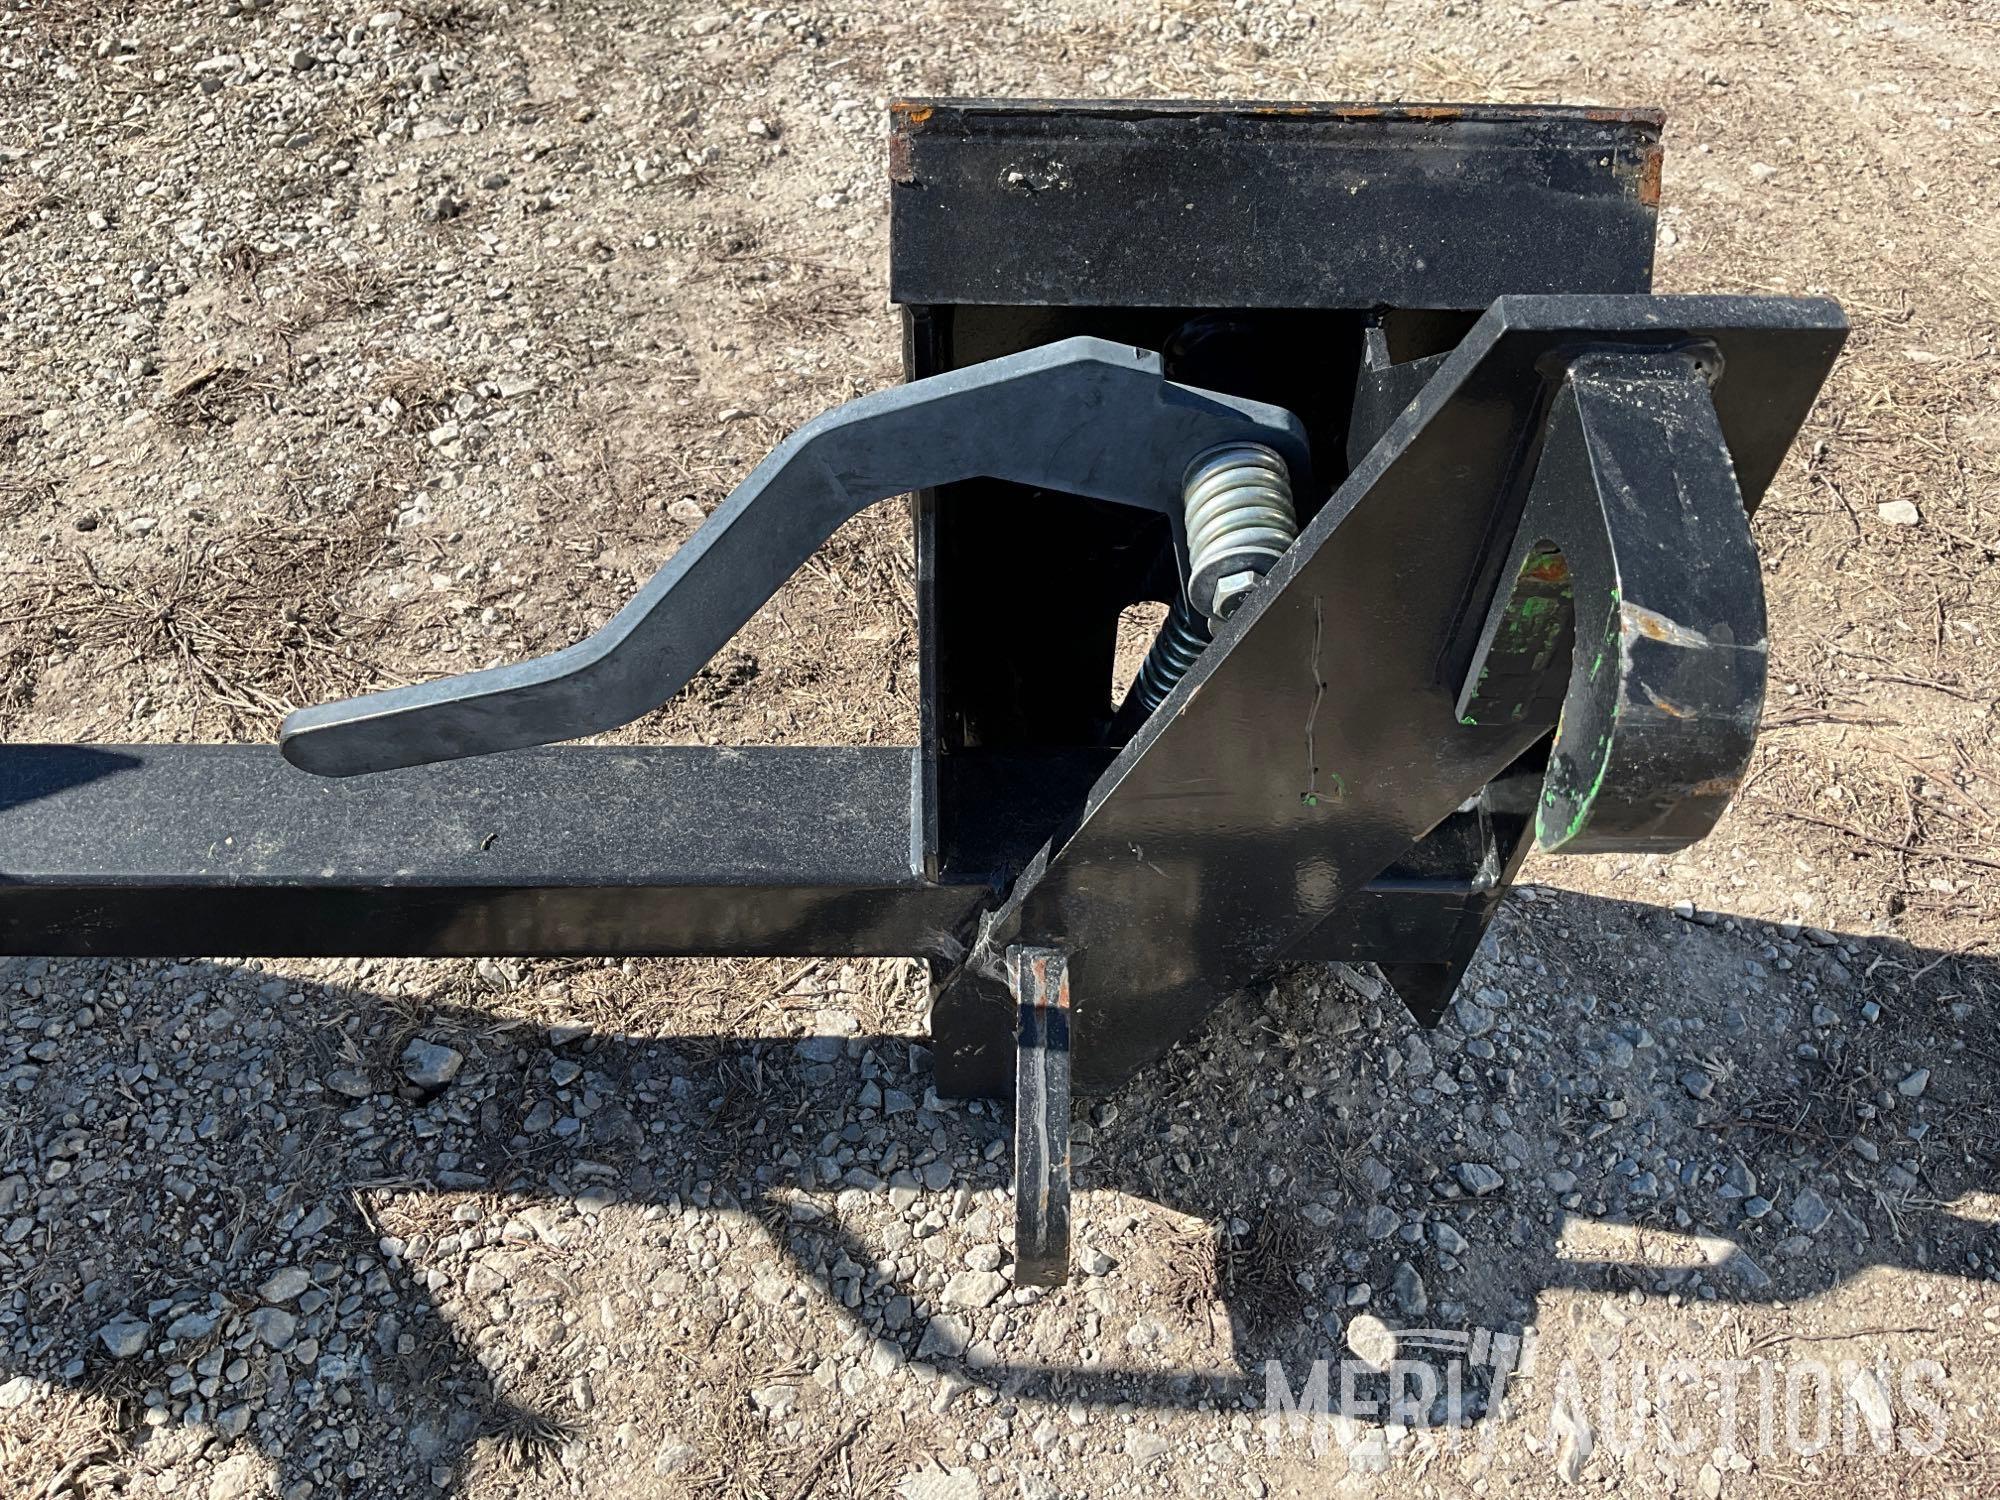 Global to skid loader attachment adapter...